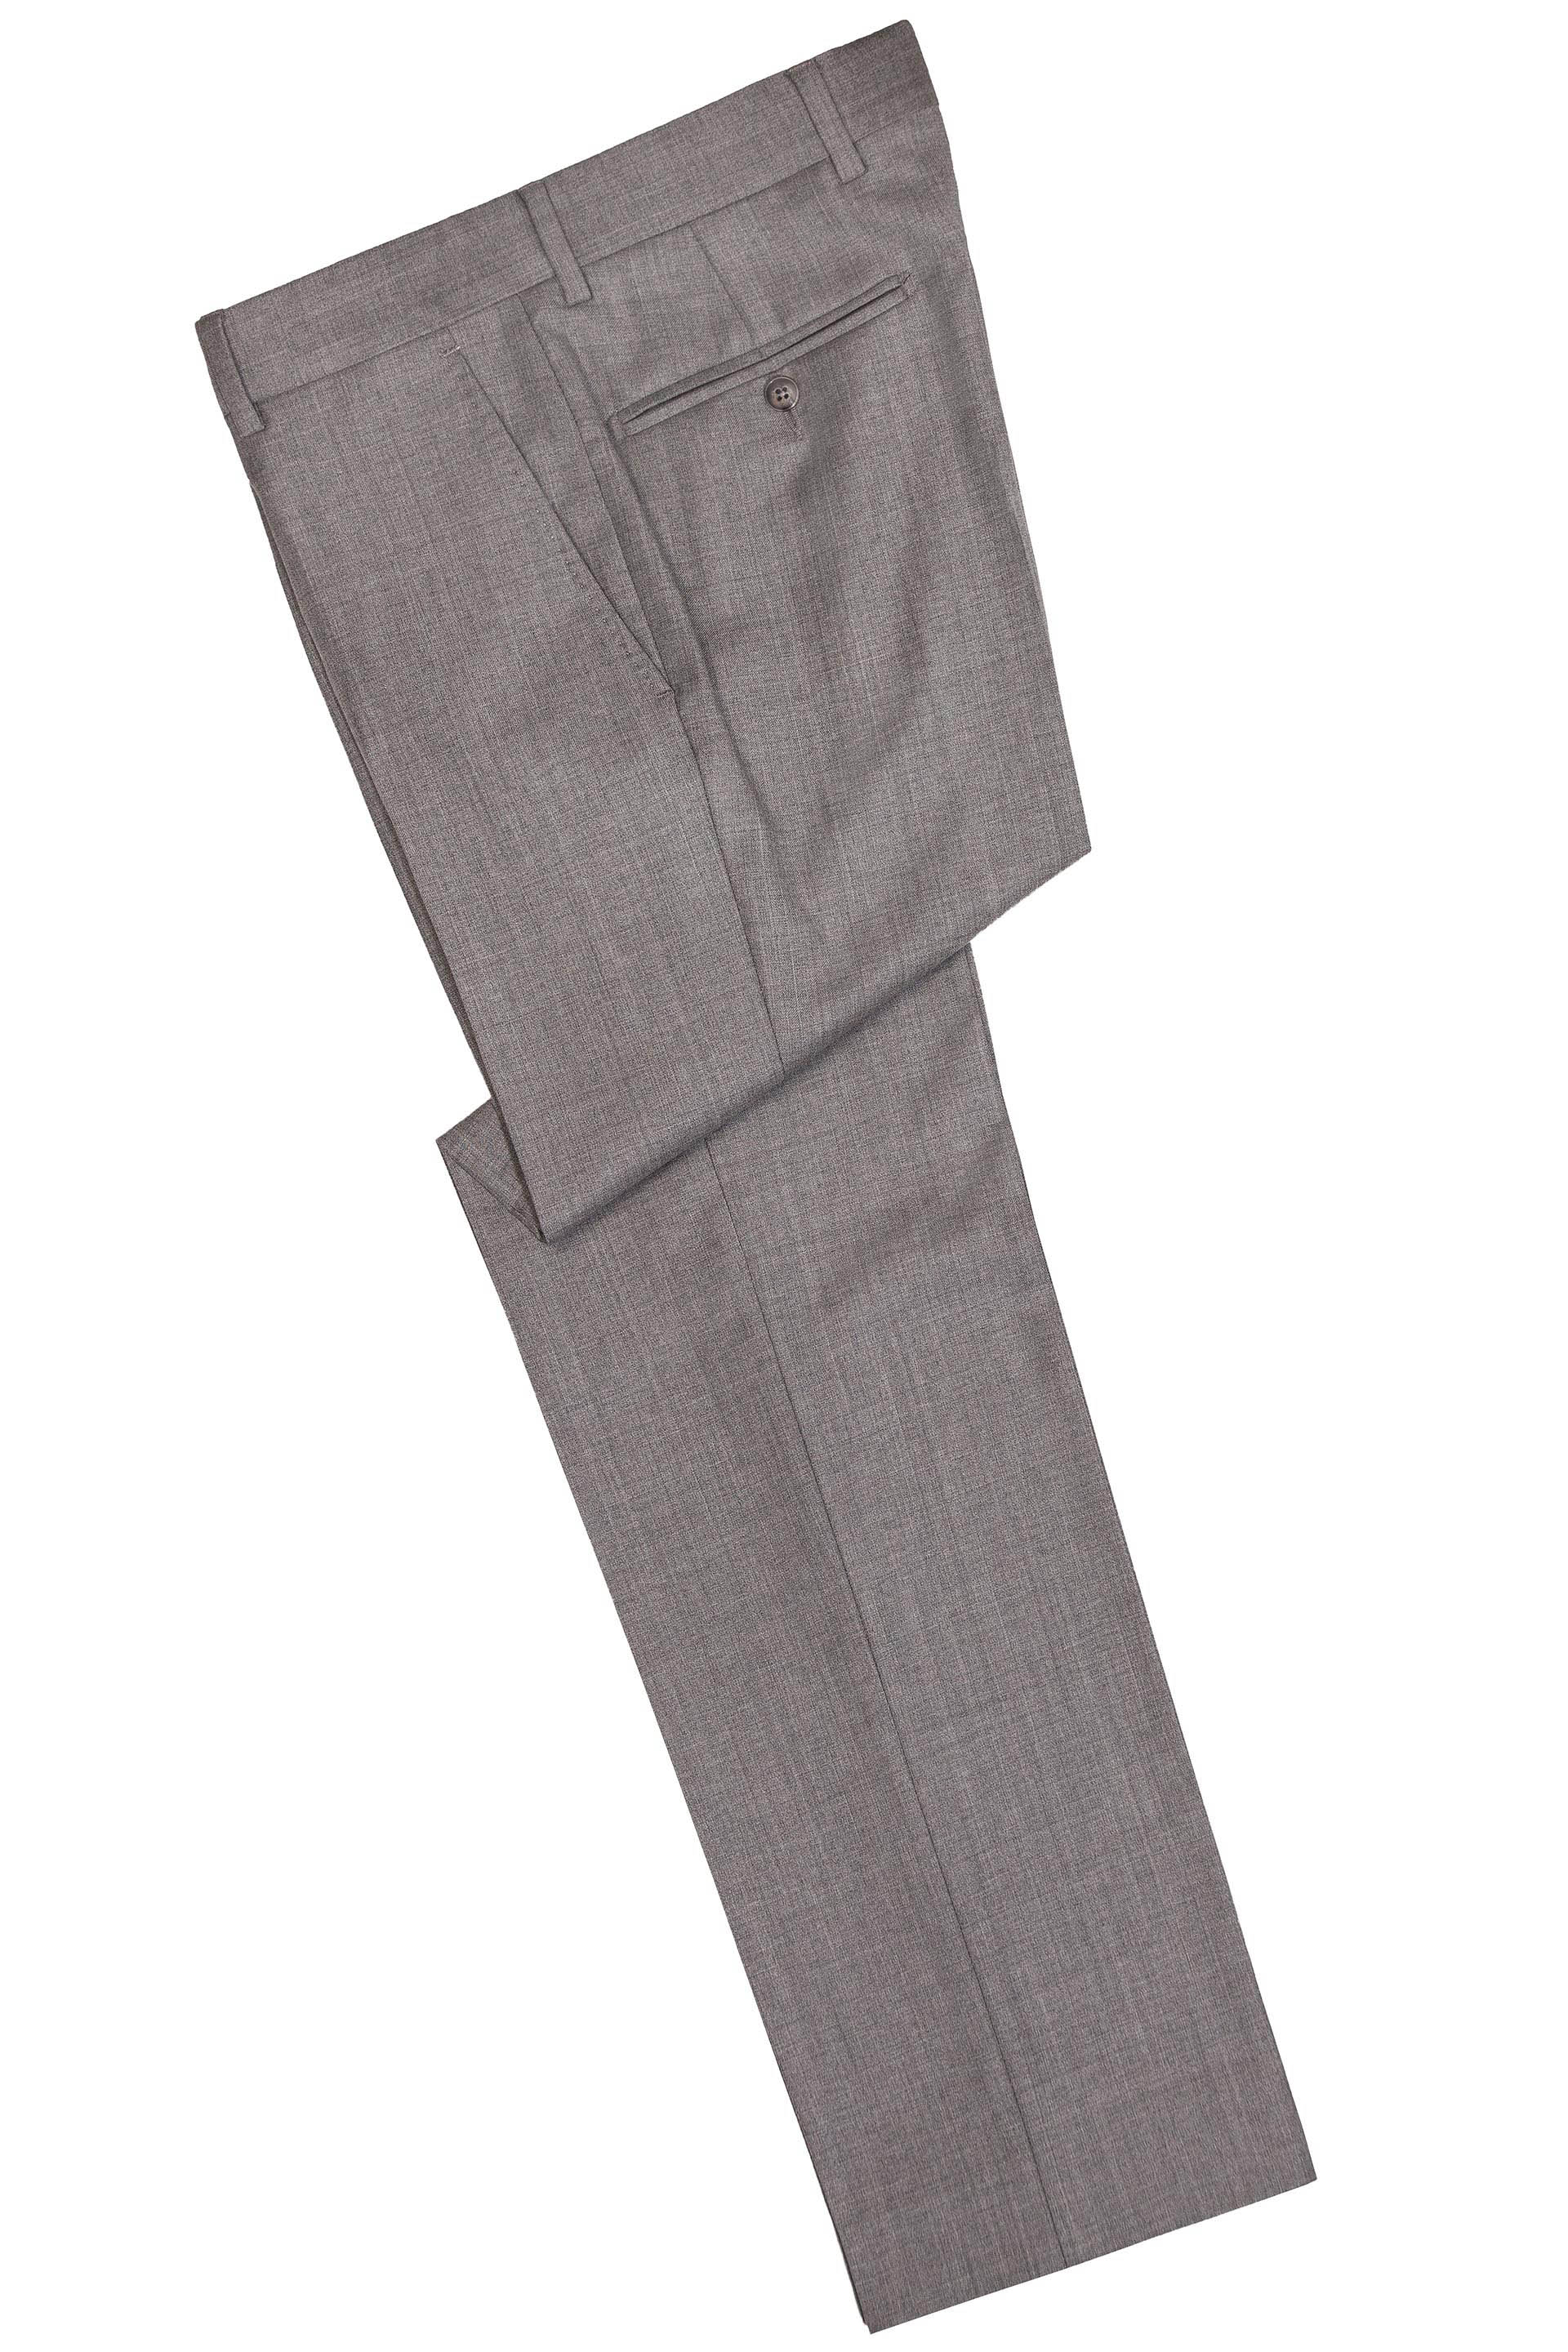 100% wool grey casual trousers | Trousers | Suits | Custom Suits ...